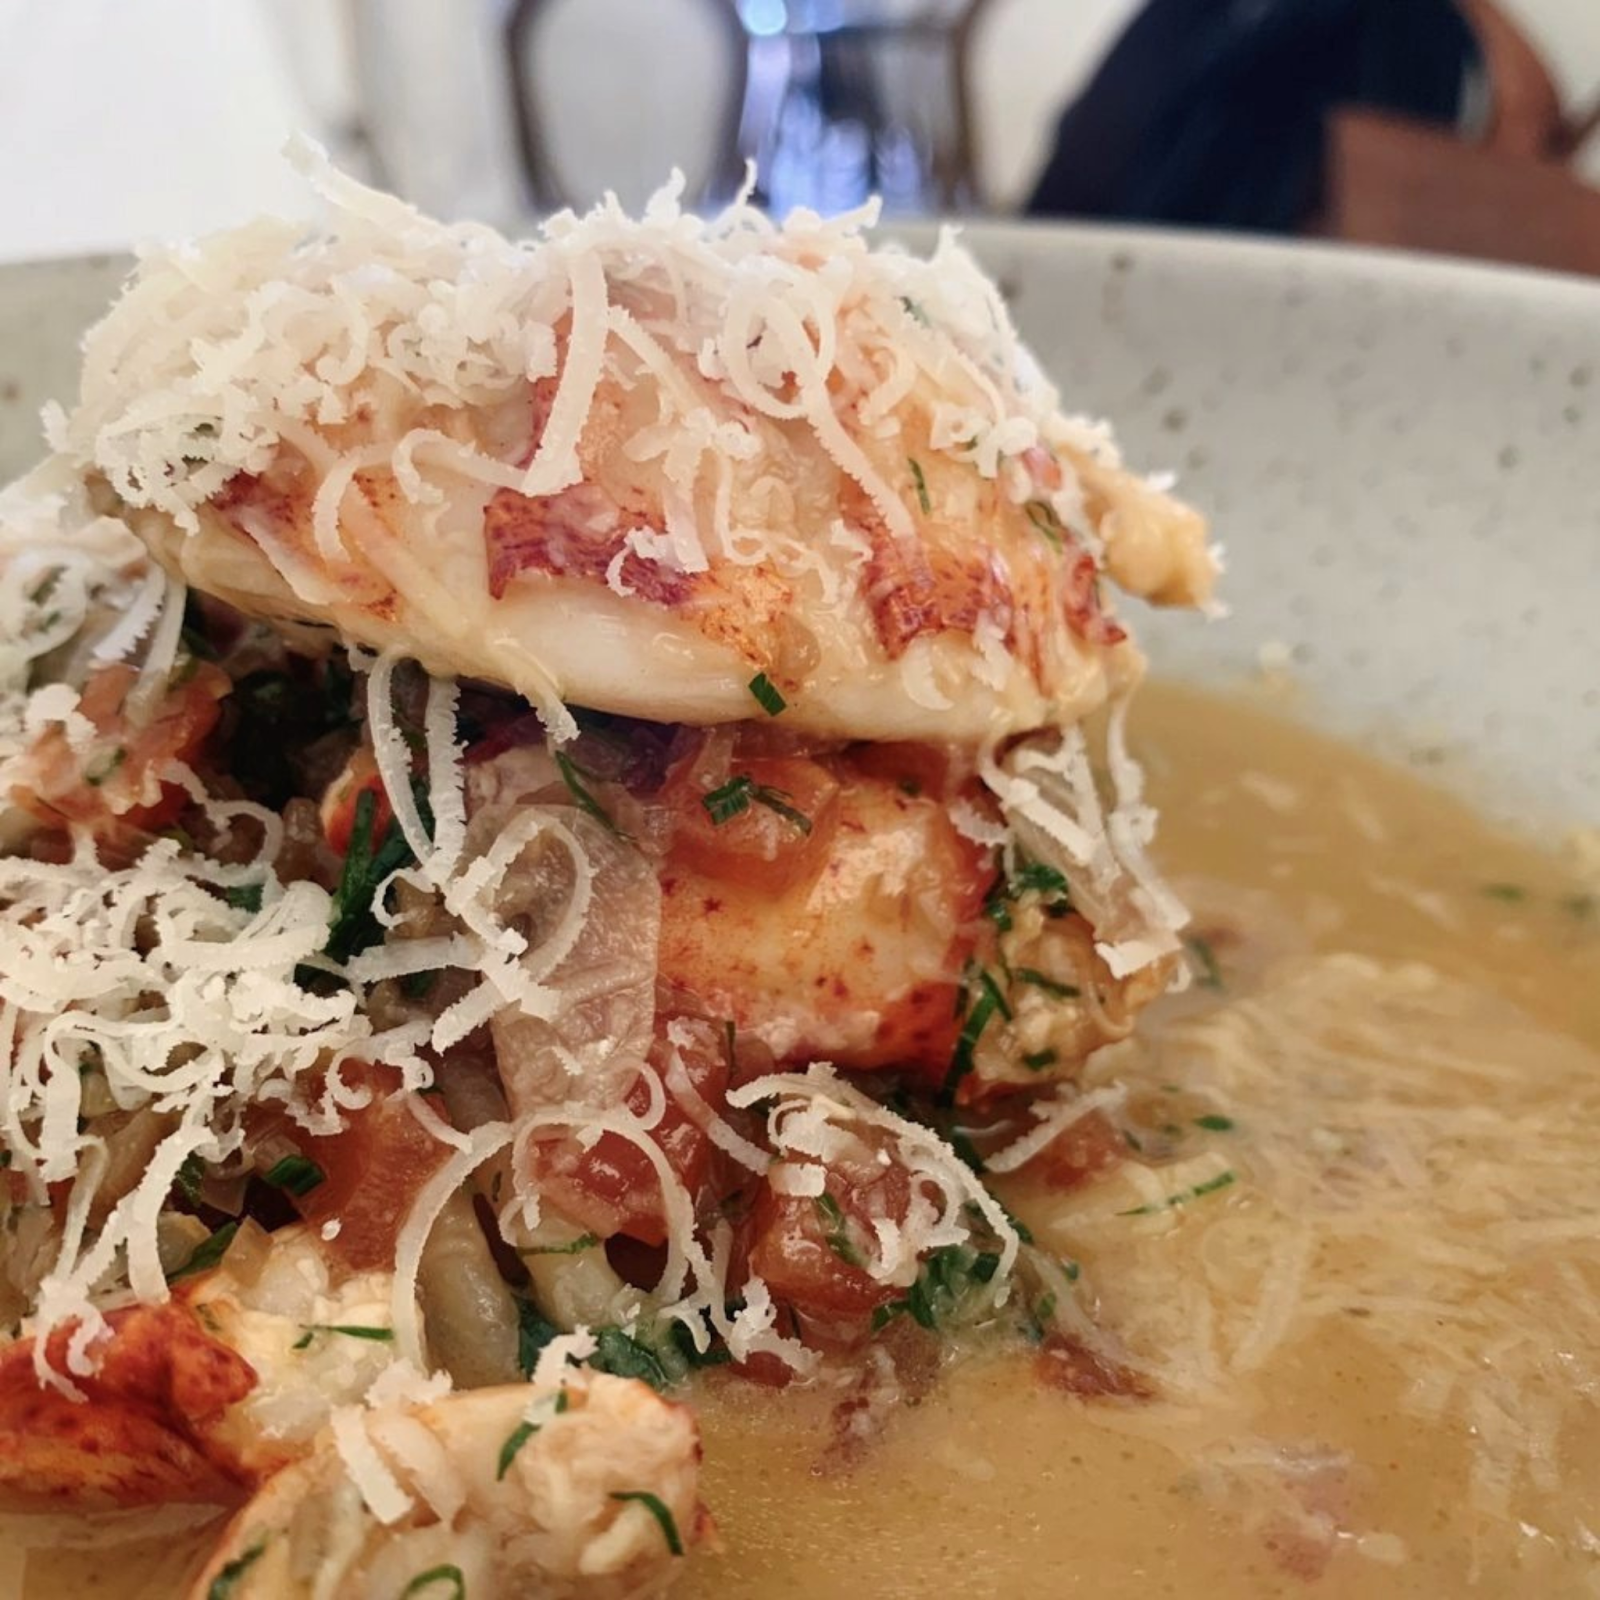 Lobster and shaved parmesan piled high on top of pasta in a bowl with sauce.